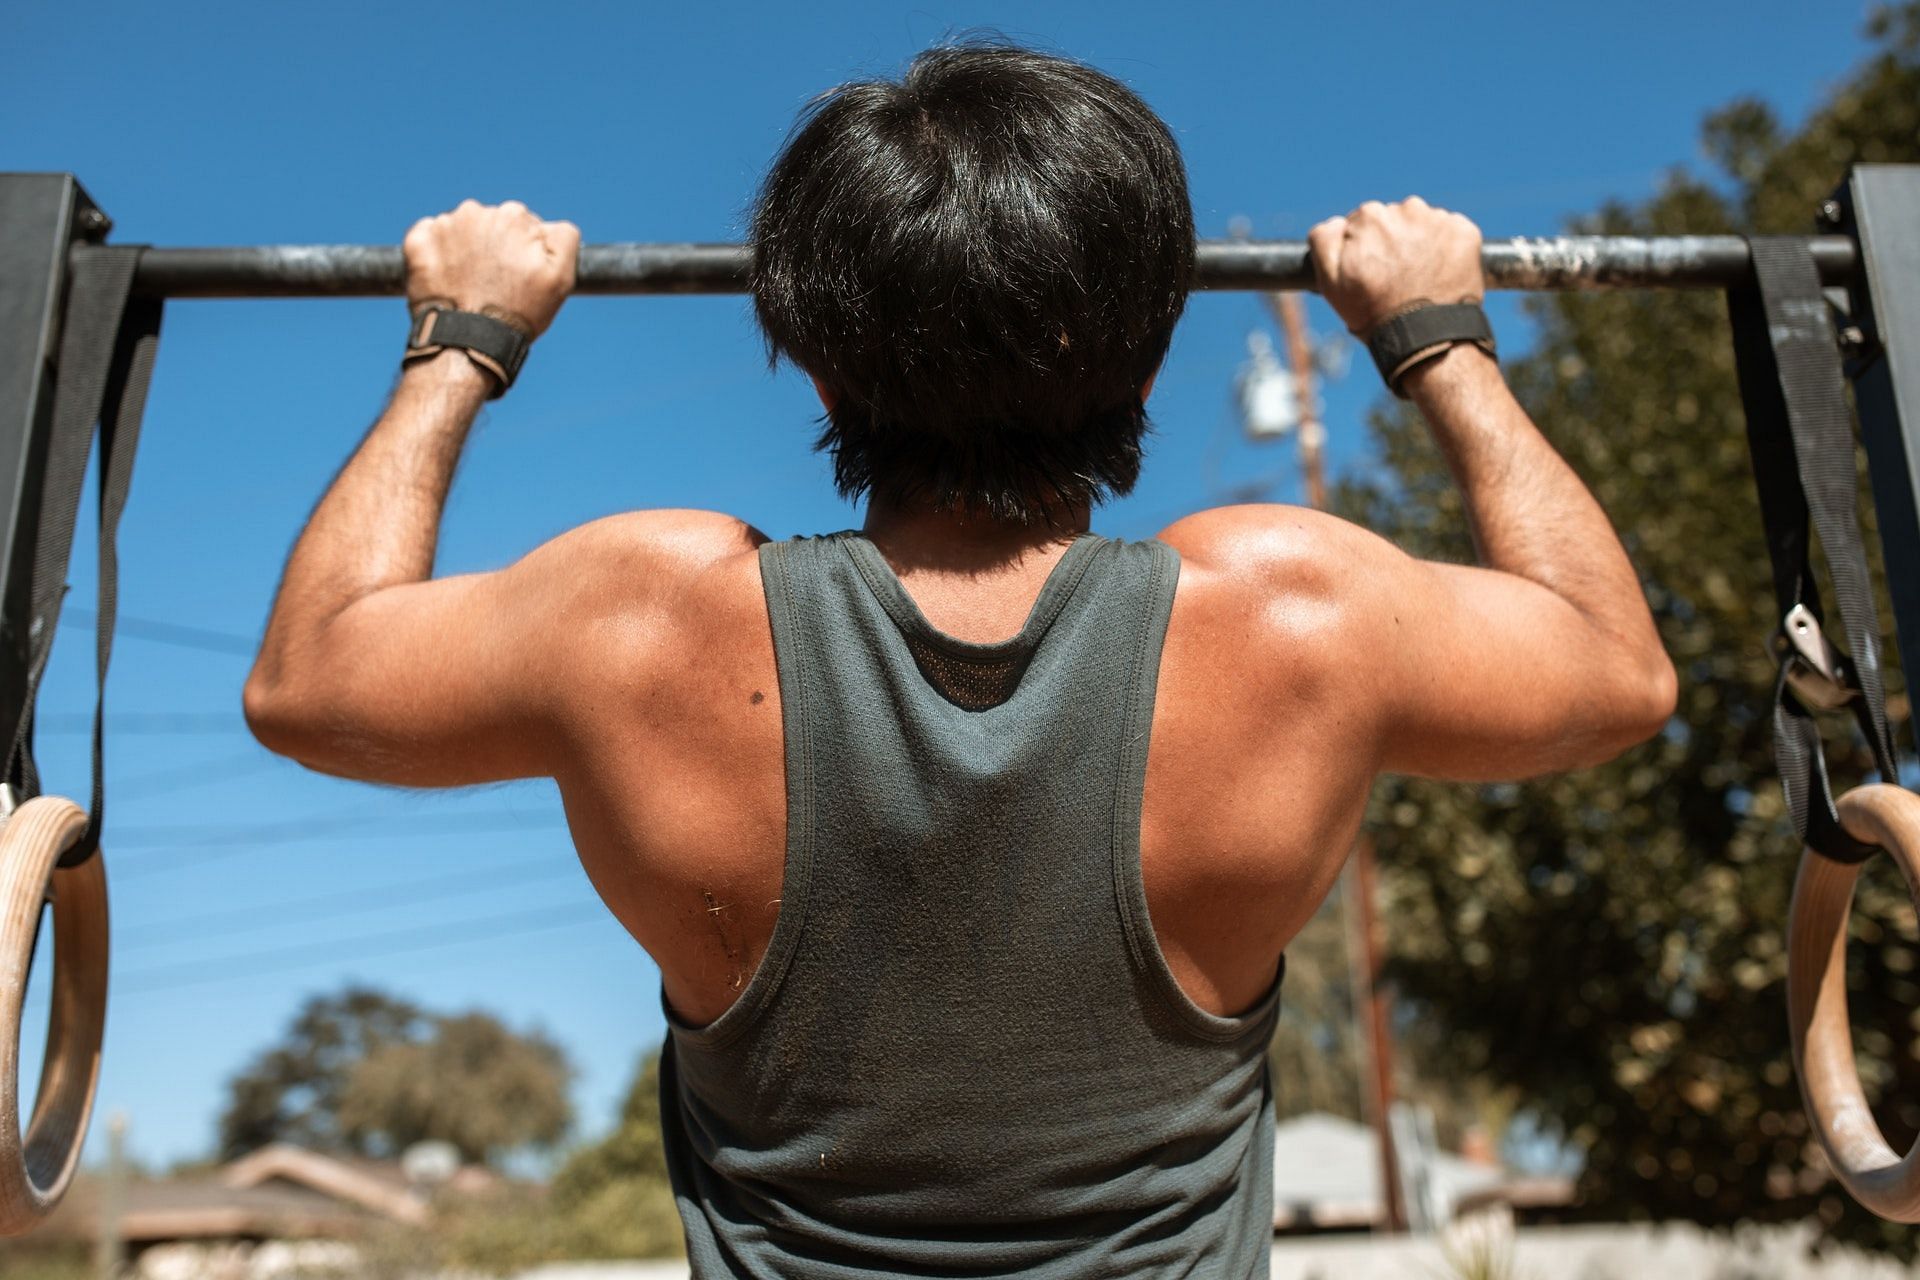 There are many full-body workouts that can help you gain muscle mass. (Photo by RODNAE Productions via pexels)